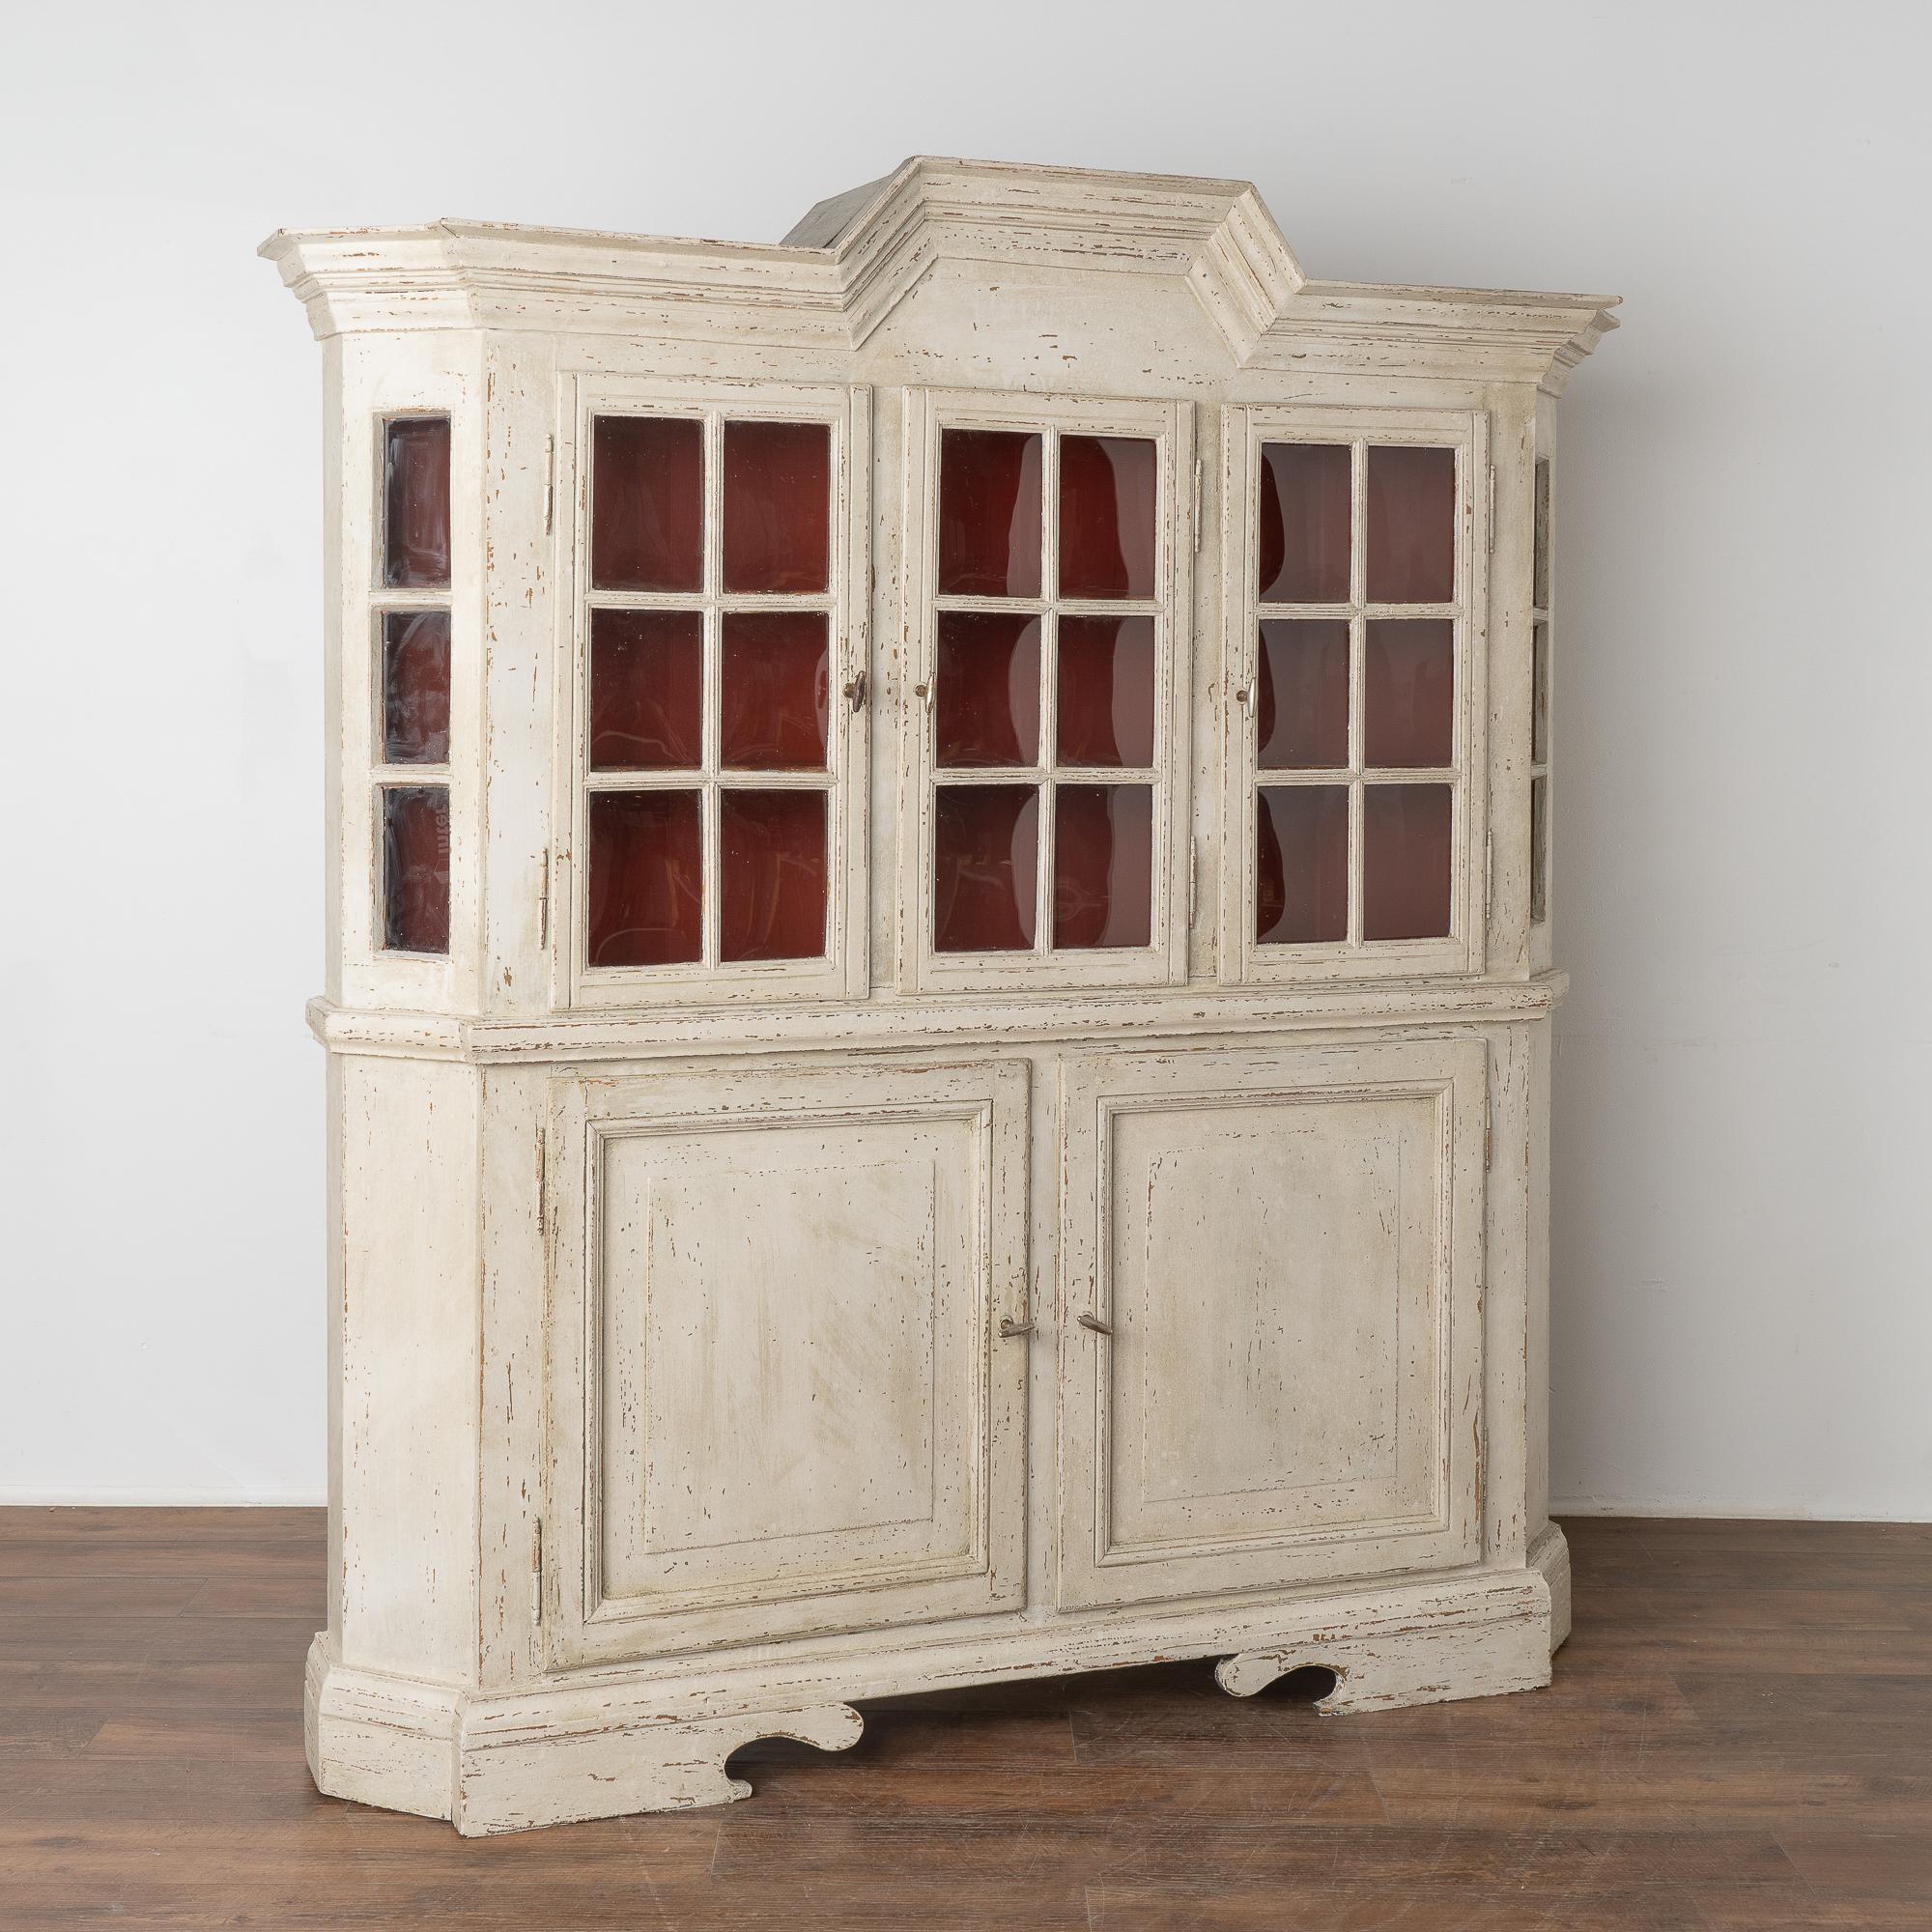 This Swedish country pine cupboard may be used as a display cabinet or bookcase. The upper pane glass doors allow for ideal display of any collection held within.
The newer professionally applied white painted finish is complimented by the